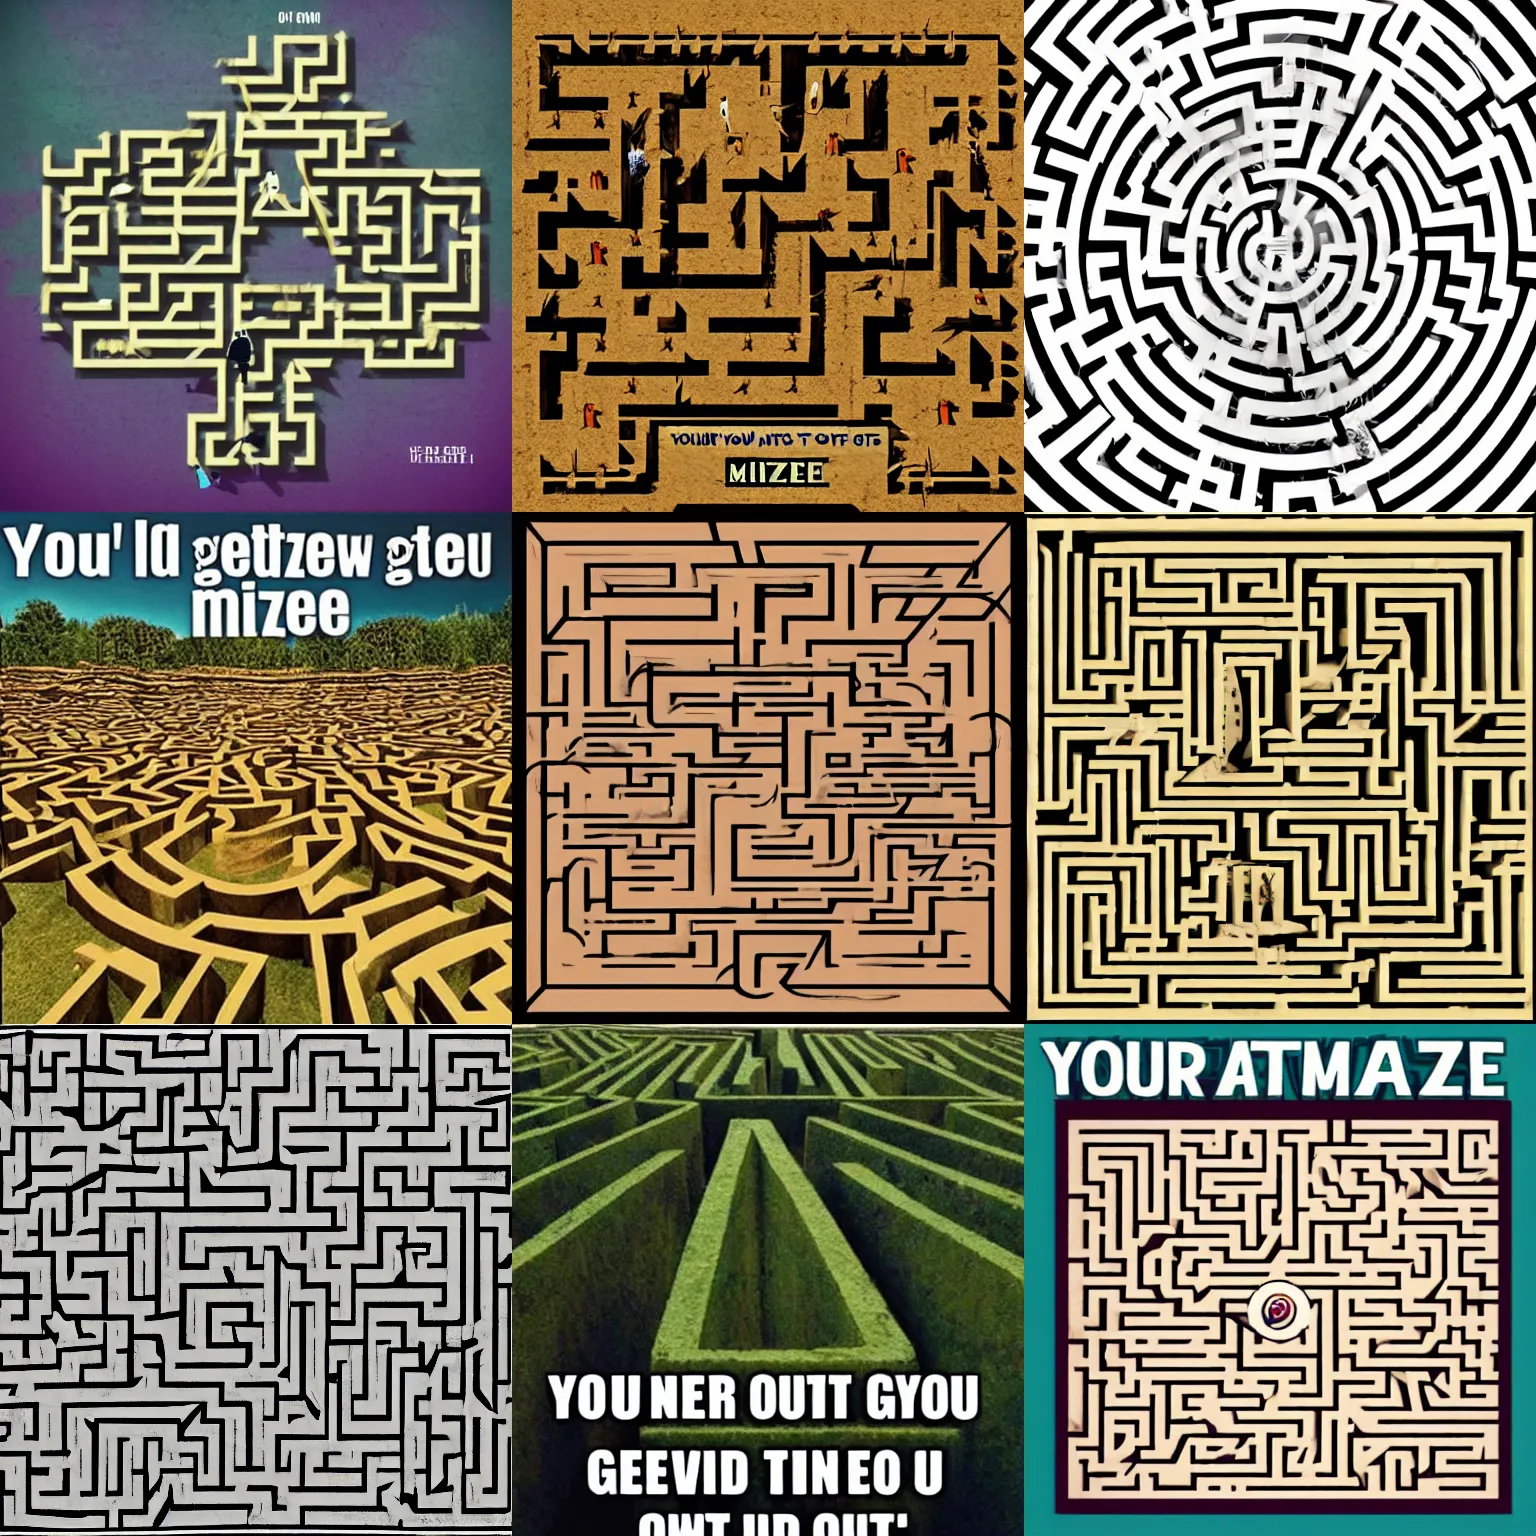 Prompt: youll never get out of this maze